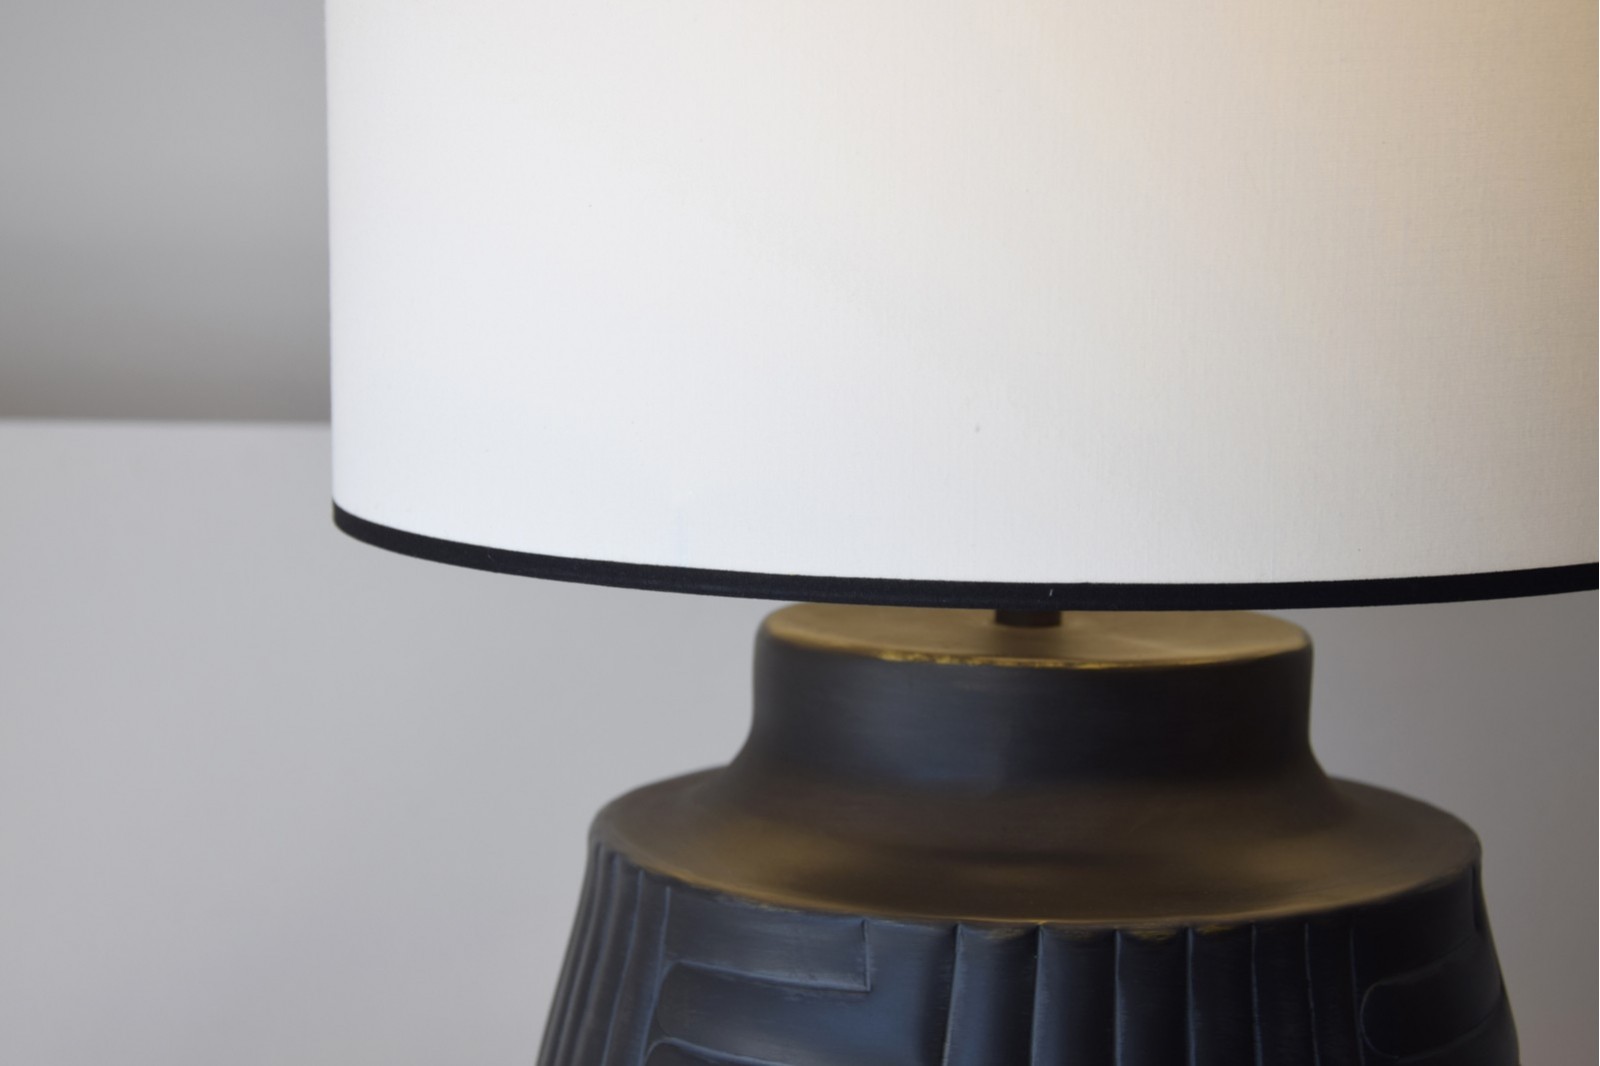 METAL TABLE LAMP N7 WITH SHADE